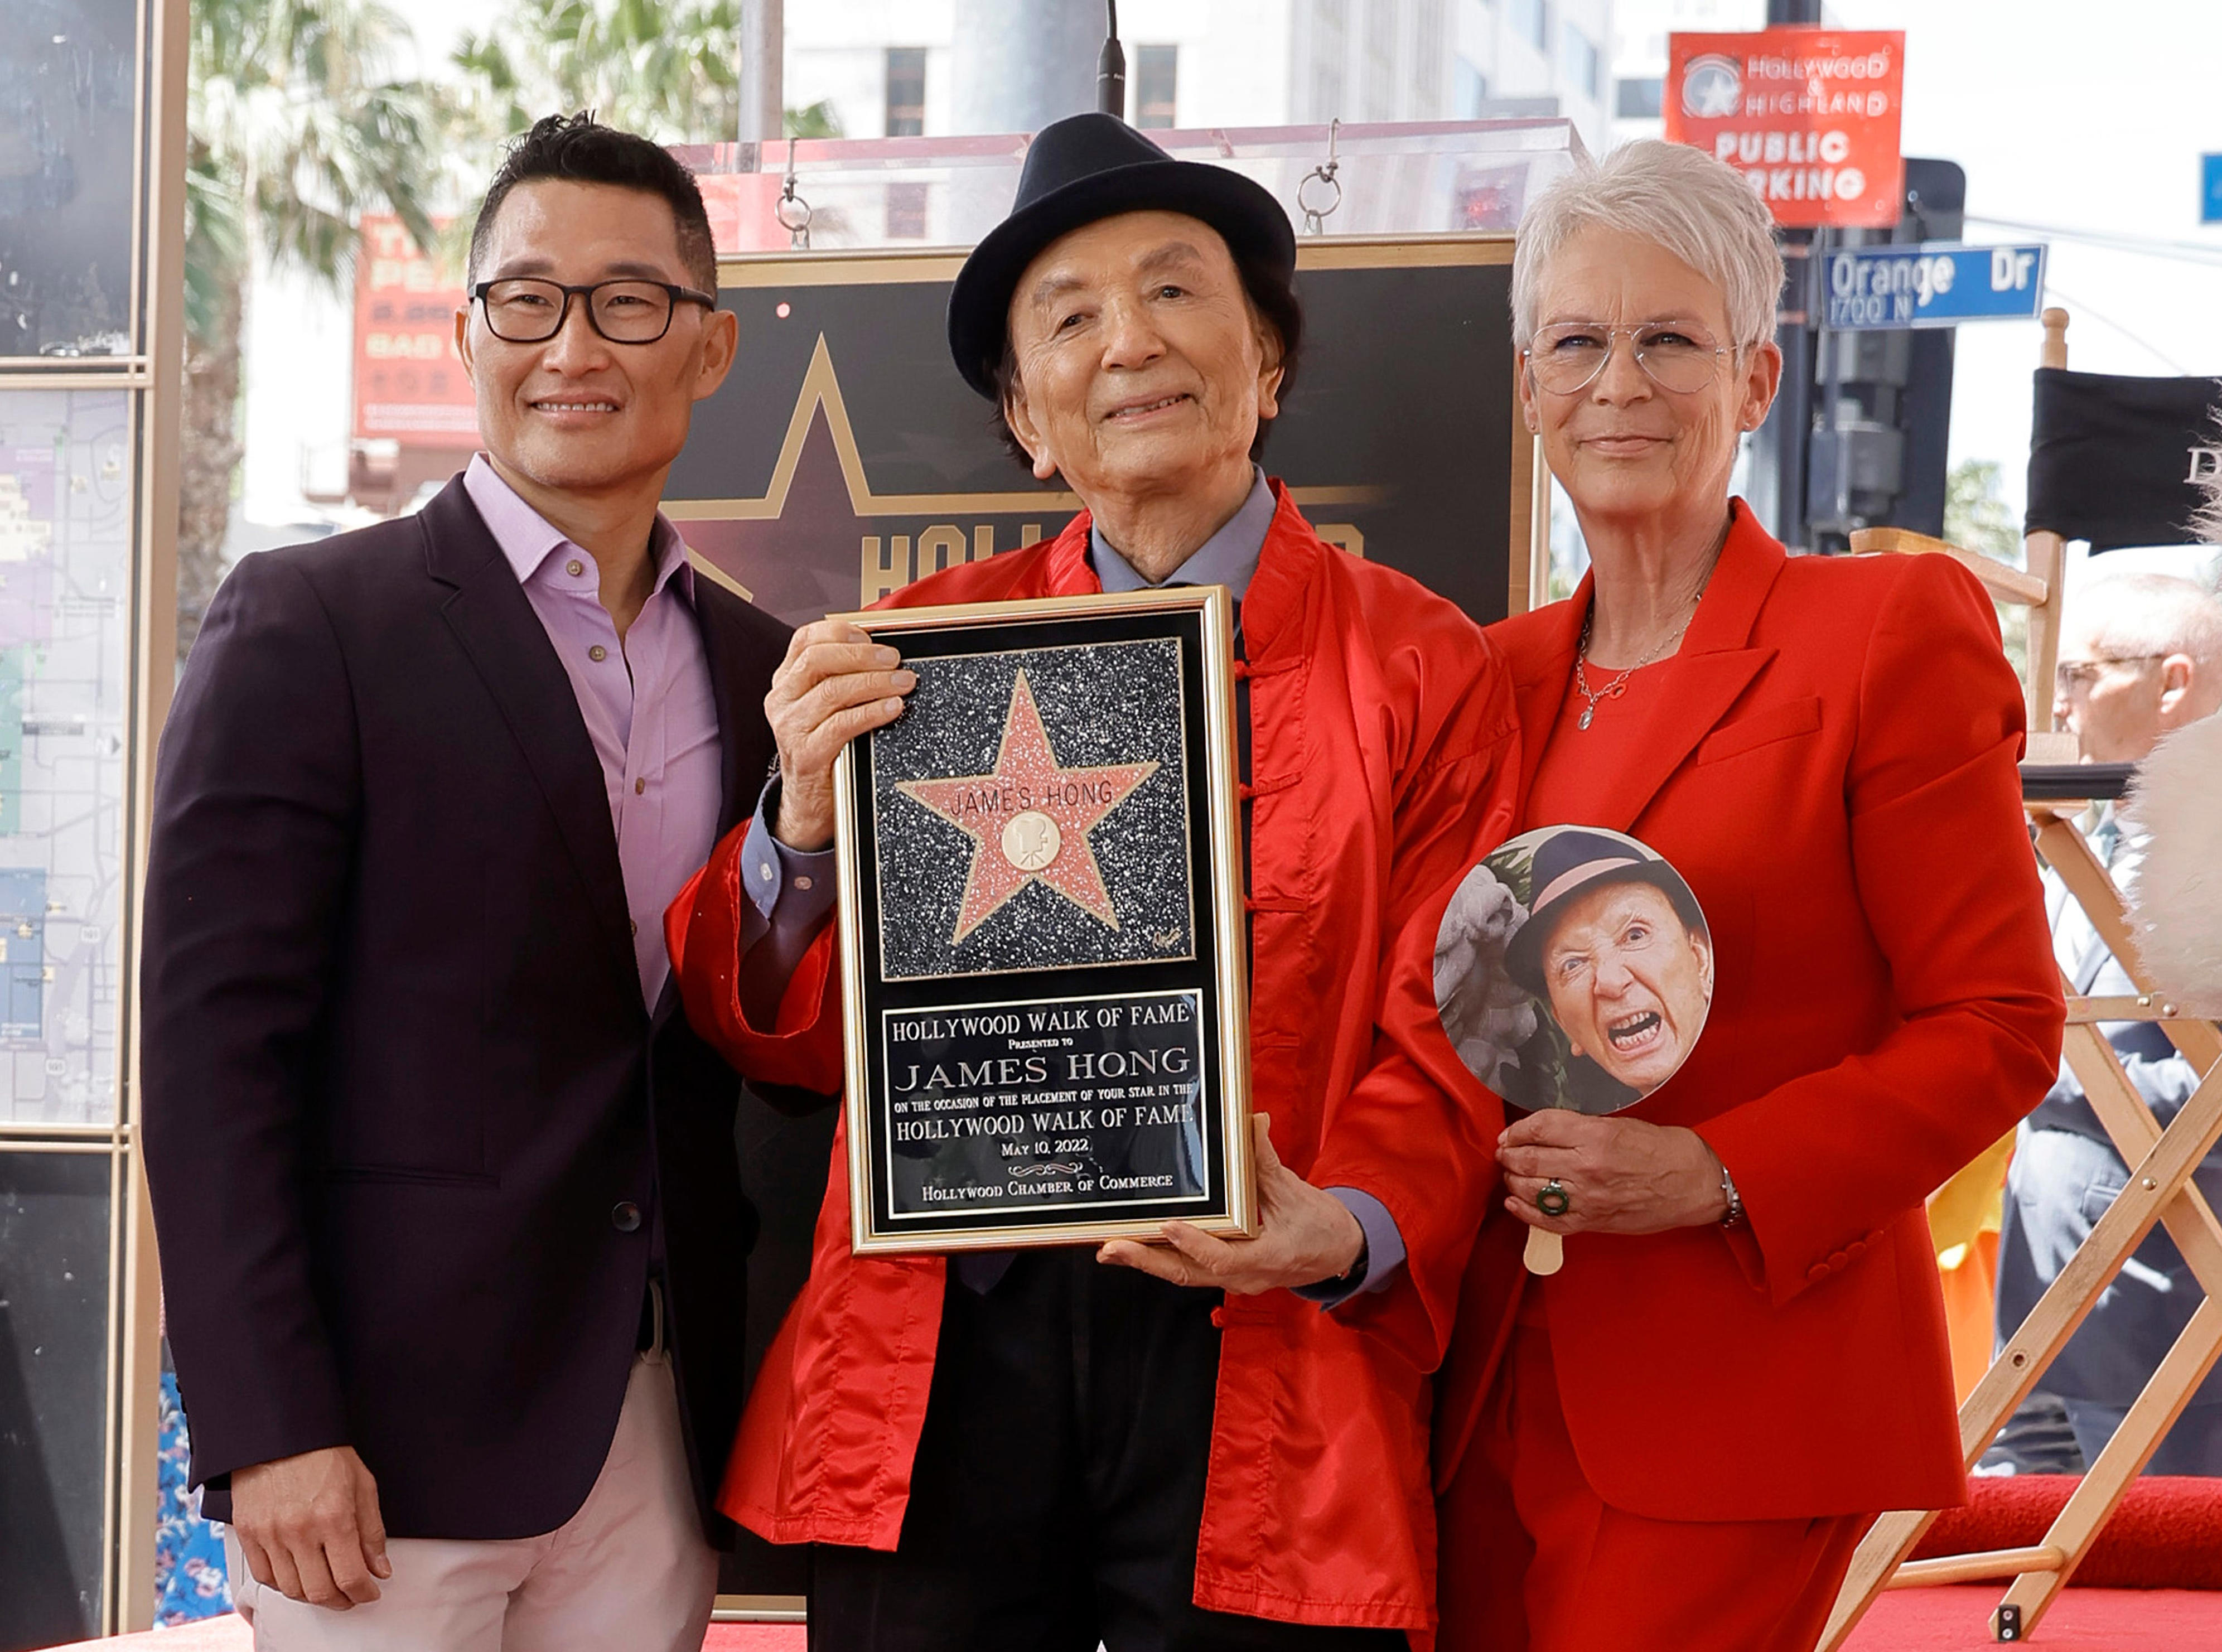 Fellow actors Daniel Dae Kim and Jamie Lee Curtis spoke at Hong's Walk of Fame ceremony. Hong has hundreds of film and television credits, including the 2022 film <a href="https://www.usatoday.com/story/entertainment/movies/2022/04/06/everything-everywhere-all-at-once-review-michelle-yeoh/9461014002/">"Everything Everywhere All at Once."</a>